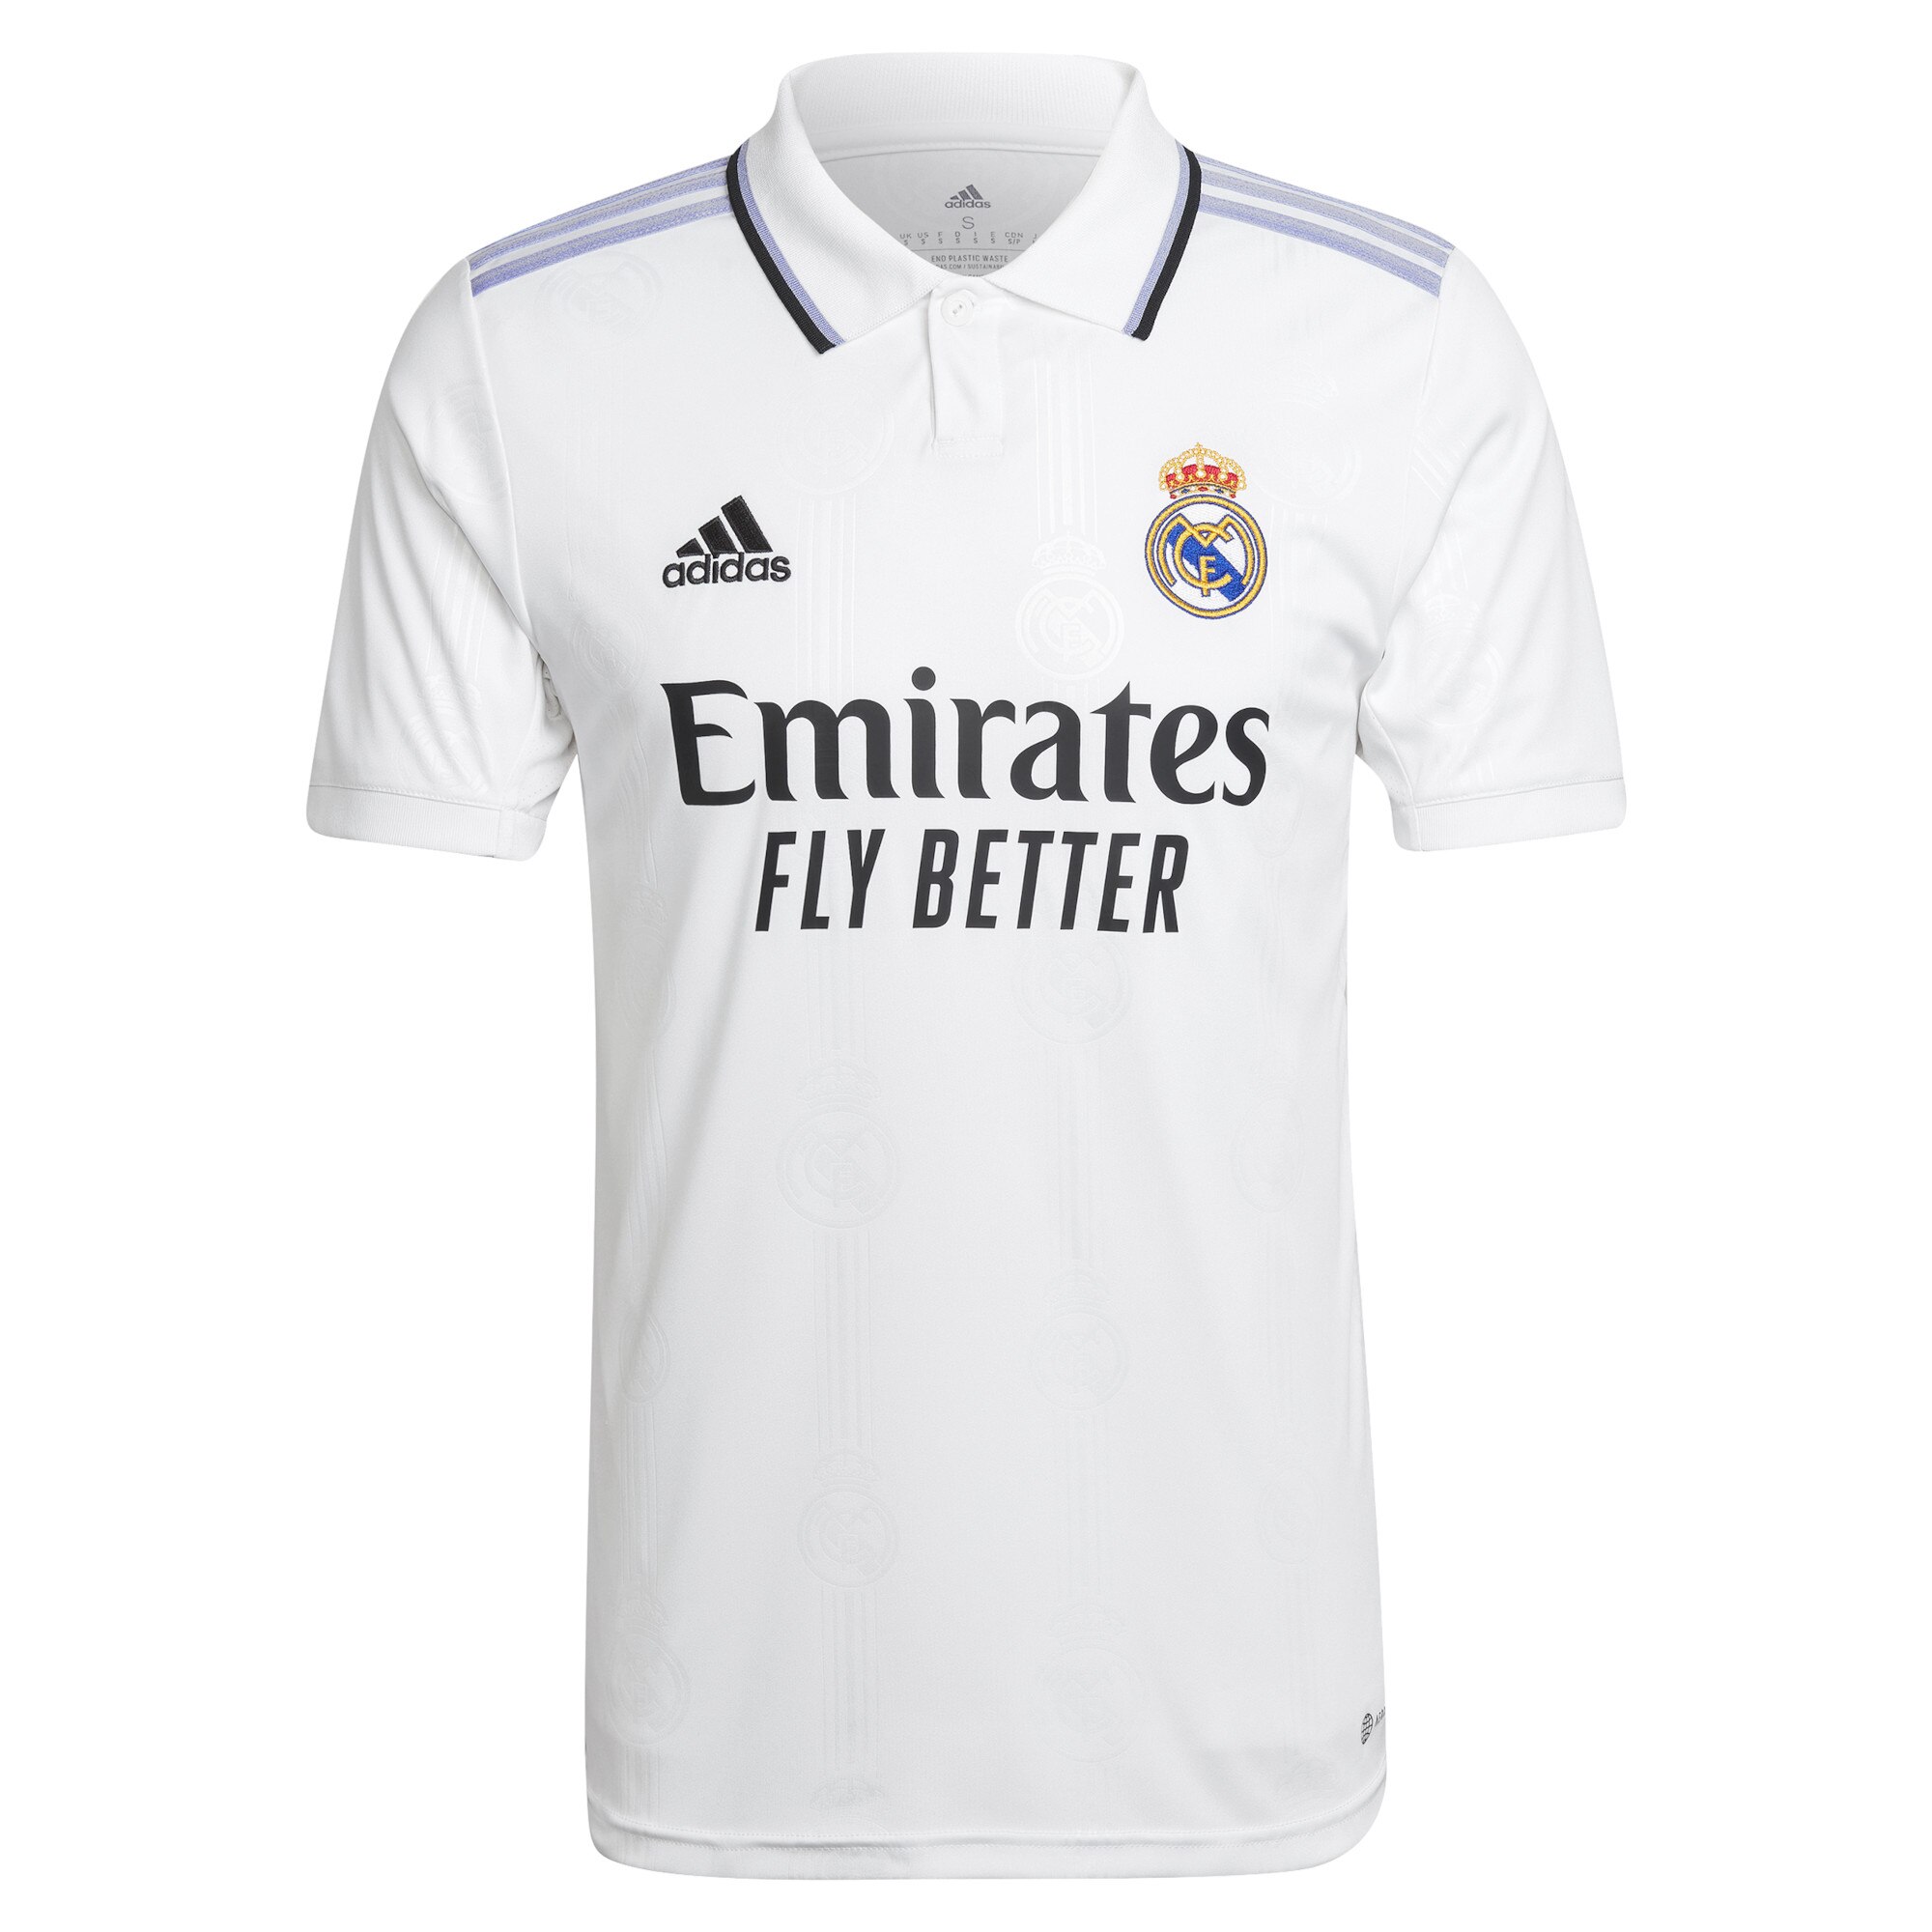 Real Madrid Home Shirt 2022/23 with Benzema 9 printing